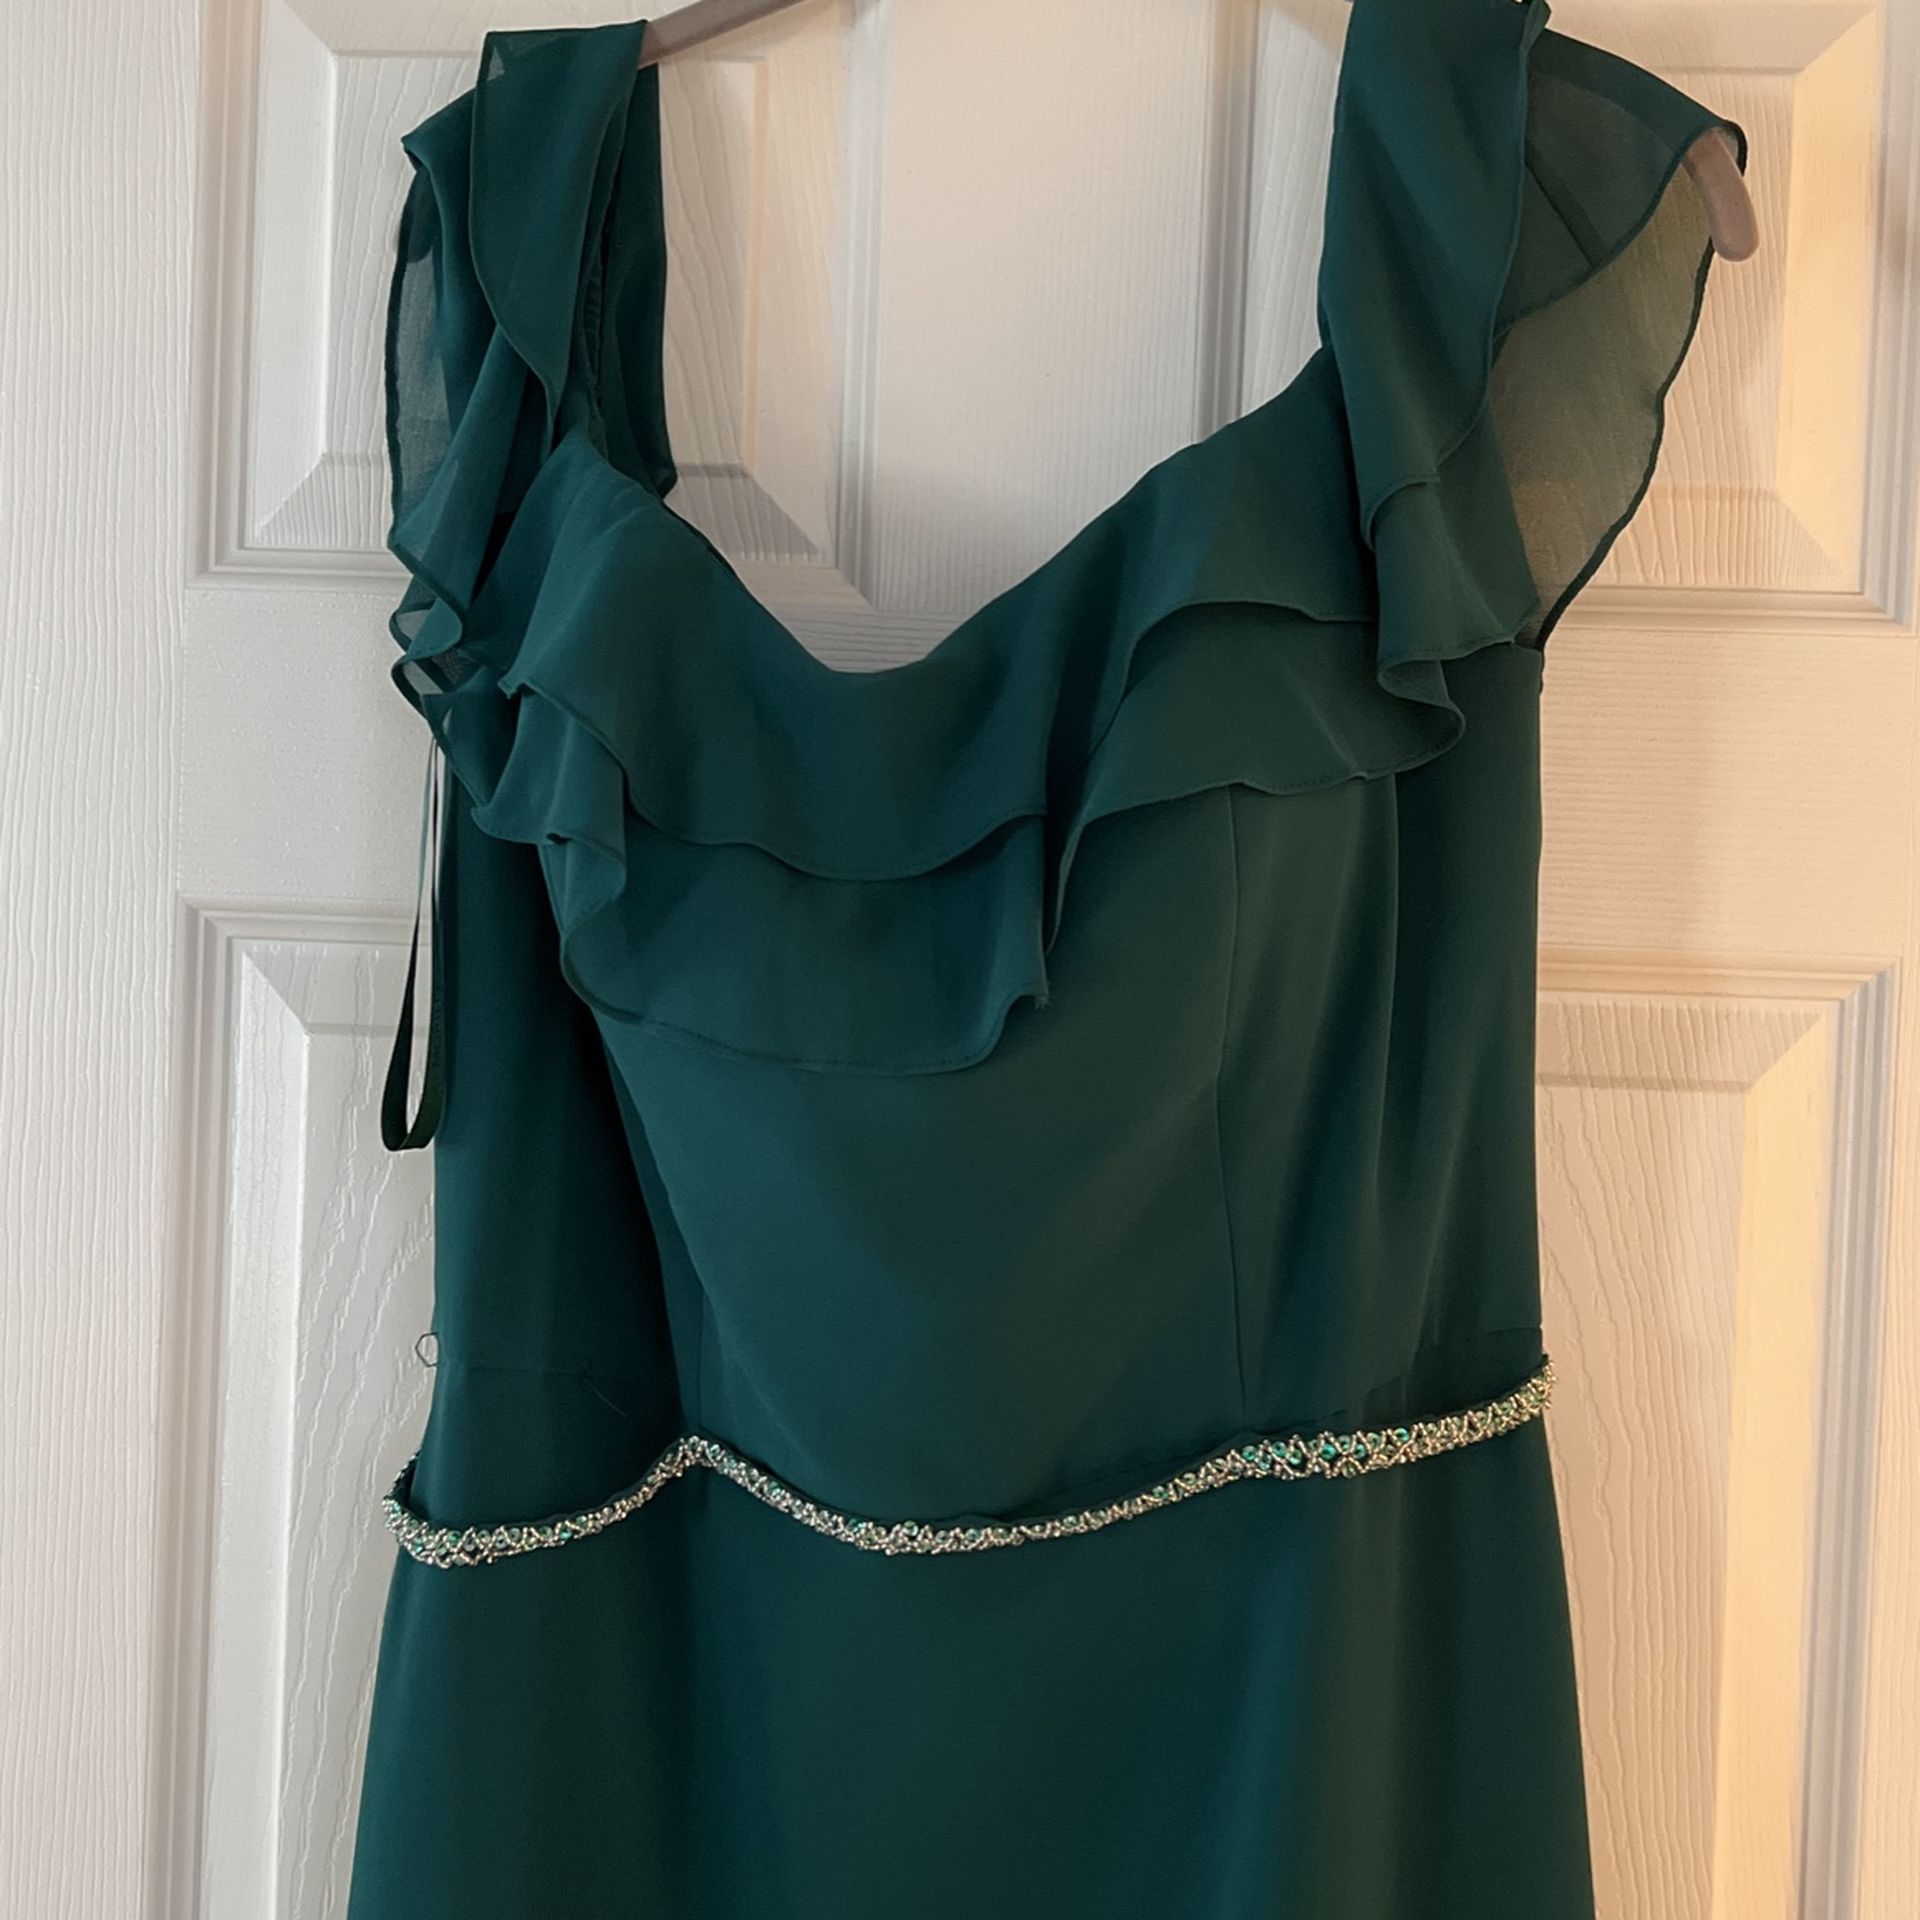 Gown - Emerald green 